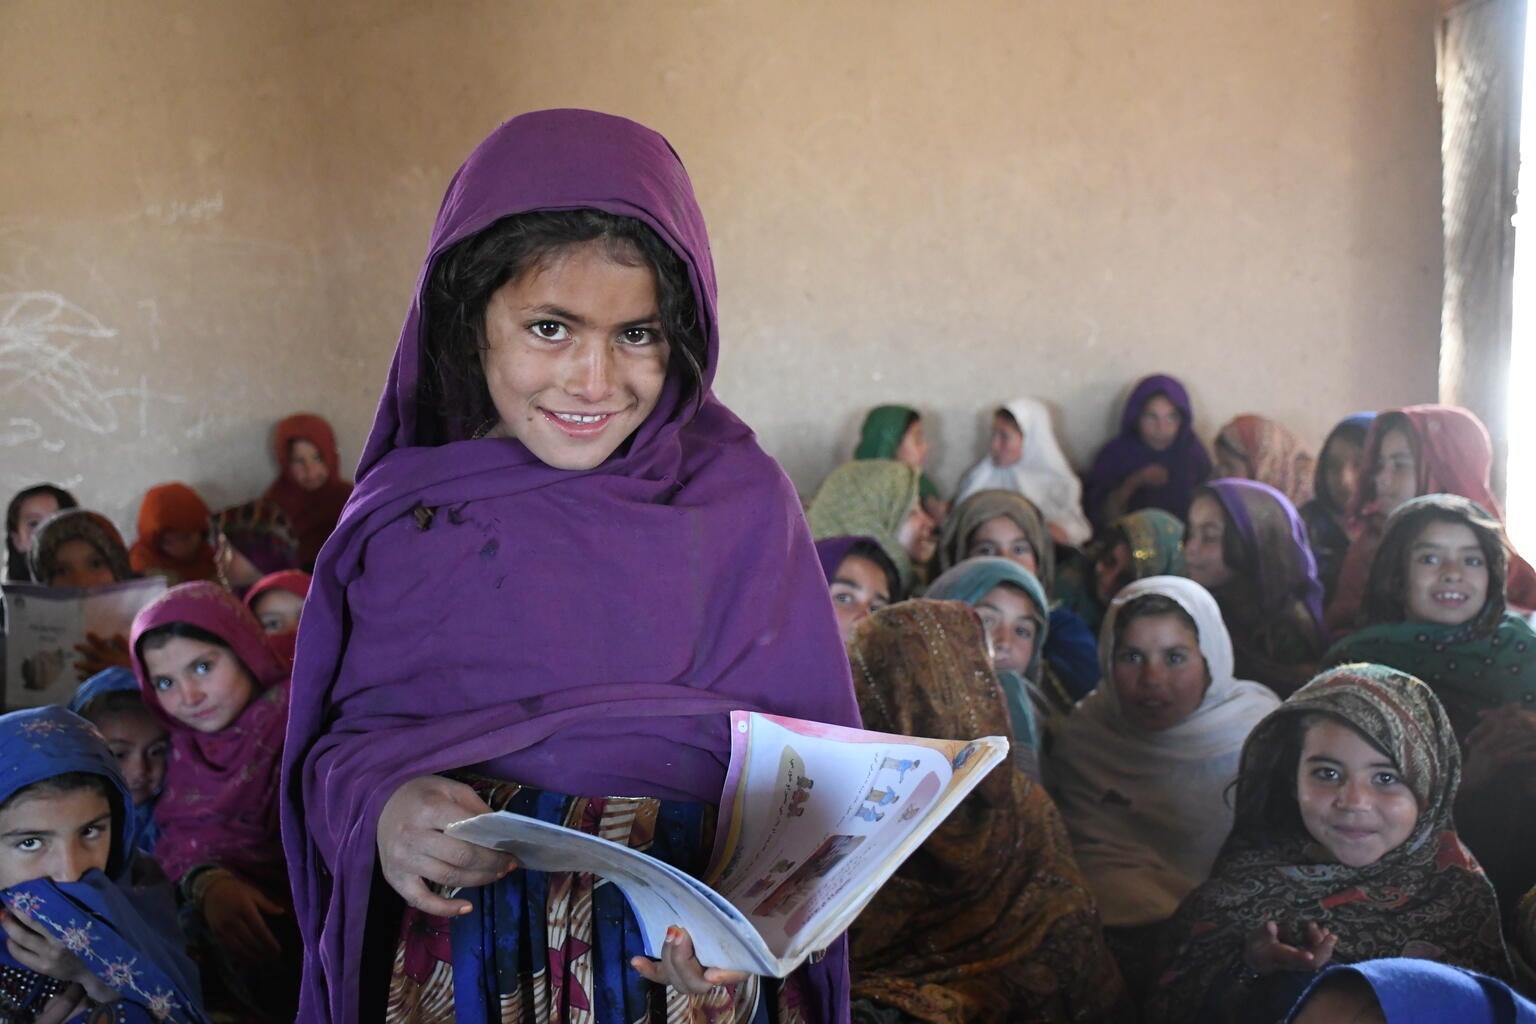 A young girls is holding a book and looking at the camera. In the background, her classmates are seating on the classroom